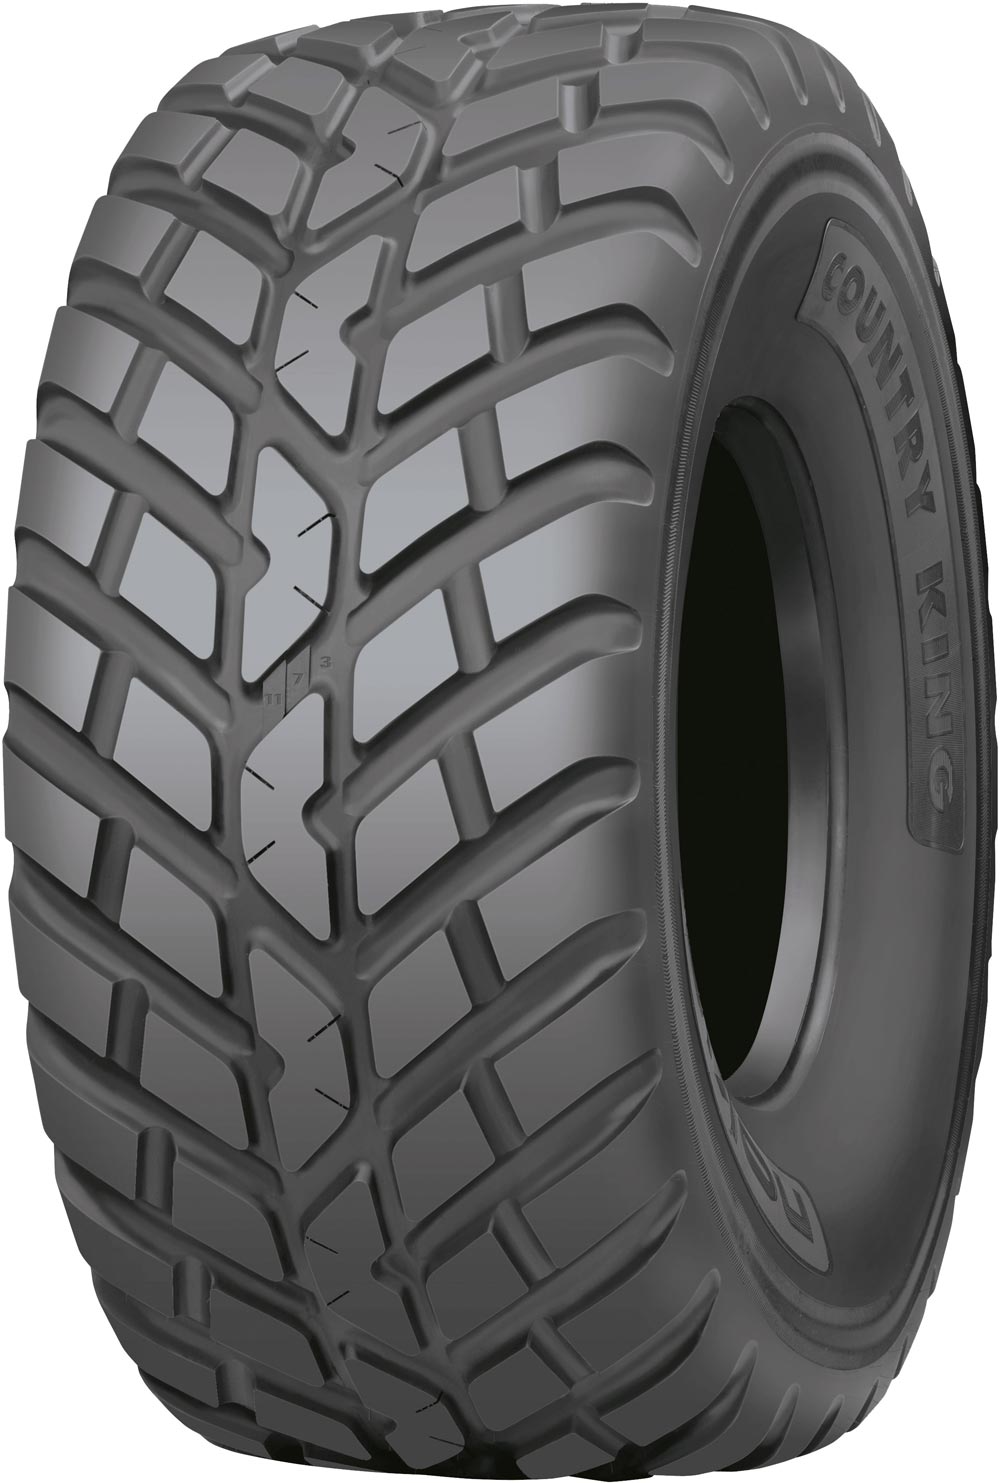 Индустриални гуми NOKIAN COUNTRY KING TL 560/45 R22.5 152D